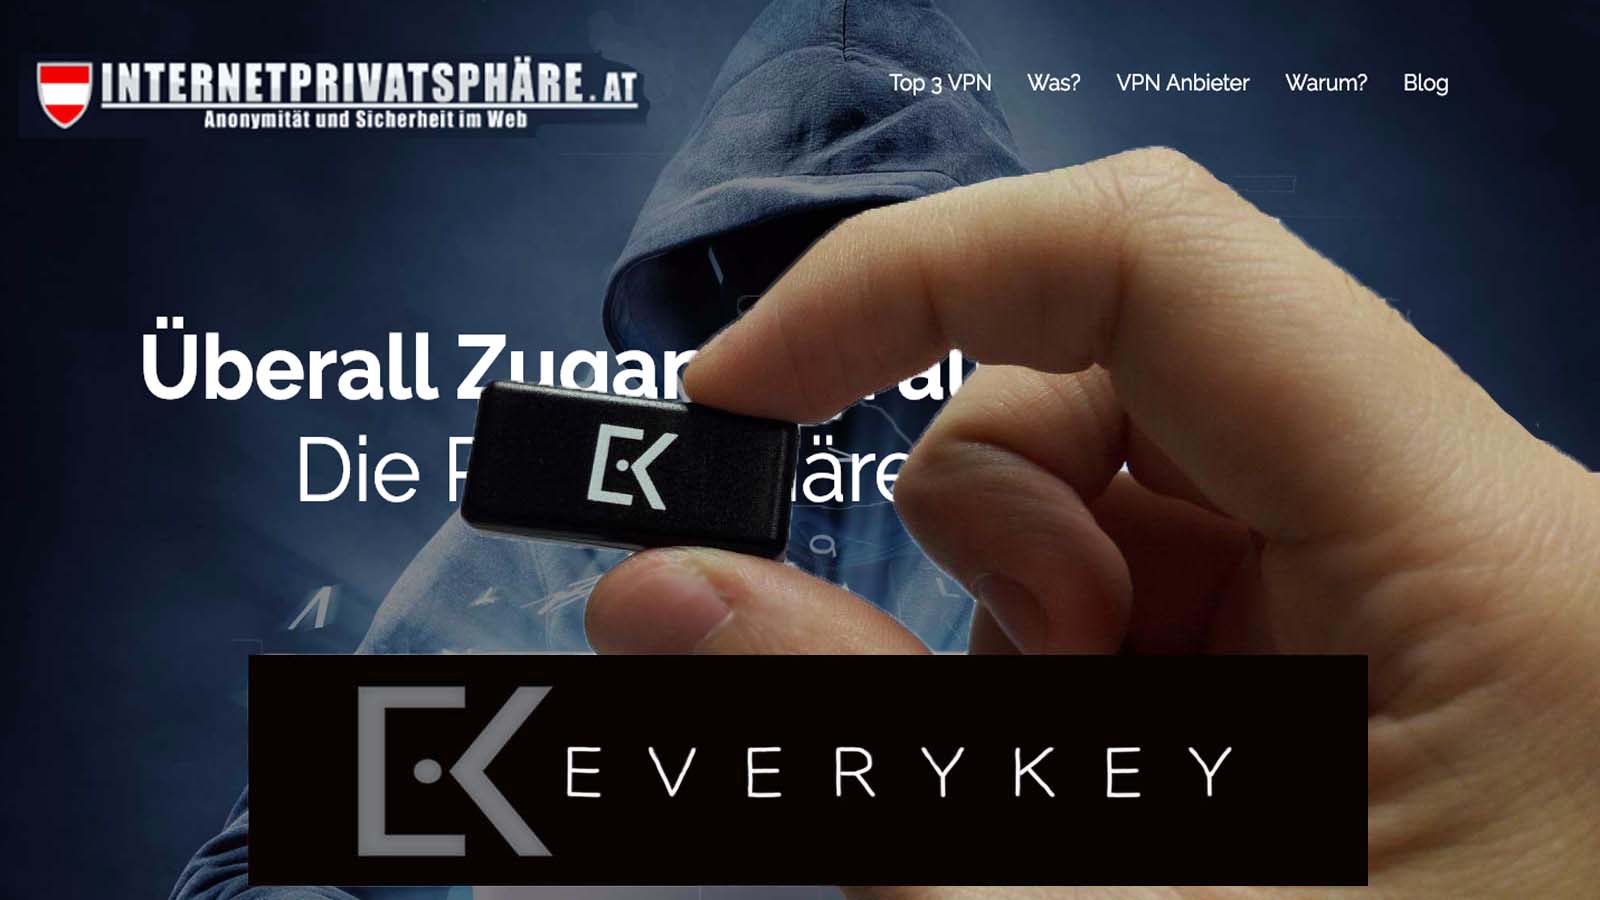 Everykey password manager 2022 Privatsphare